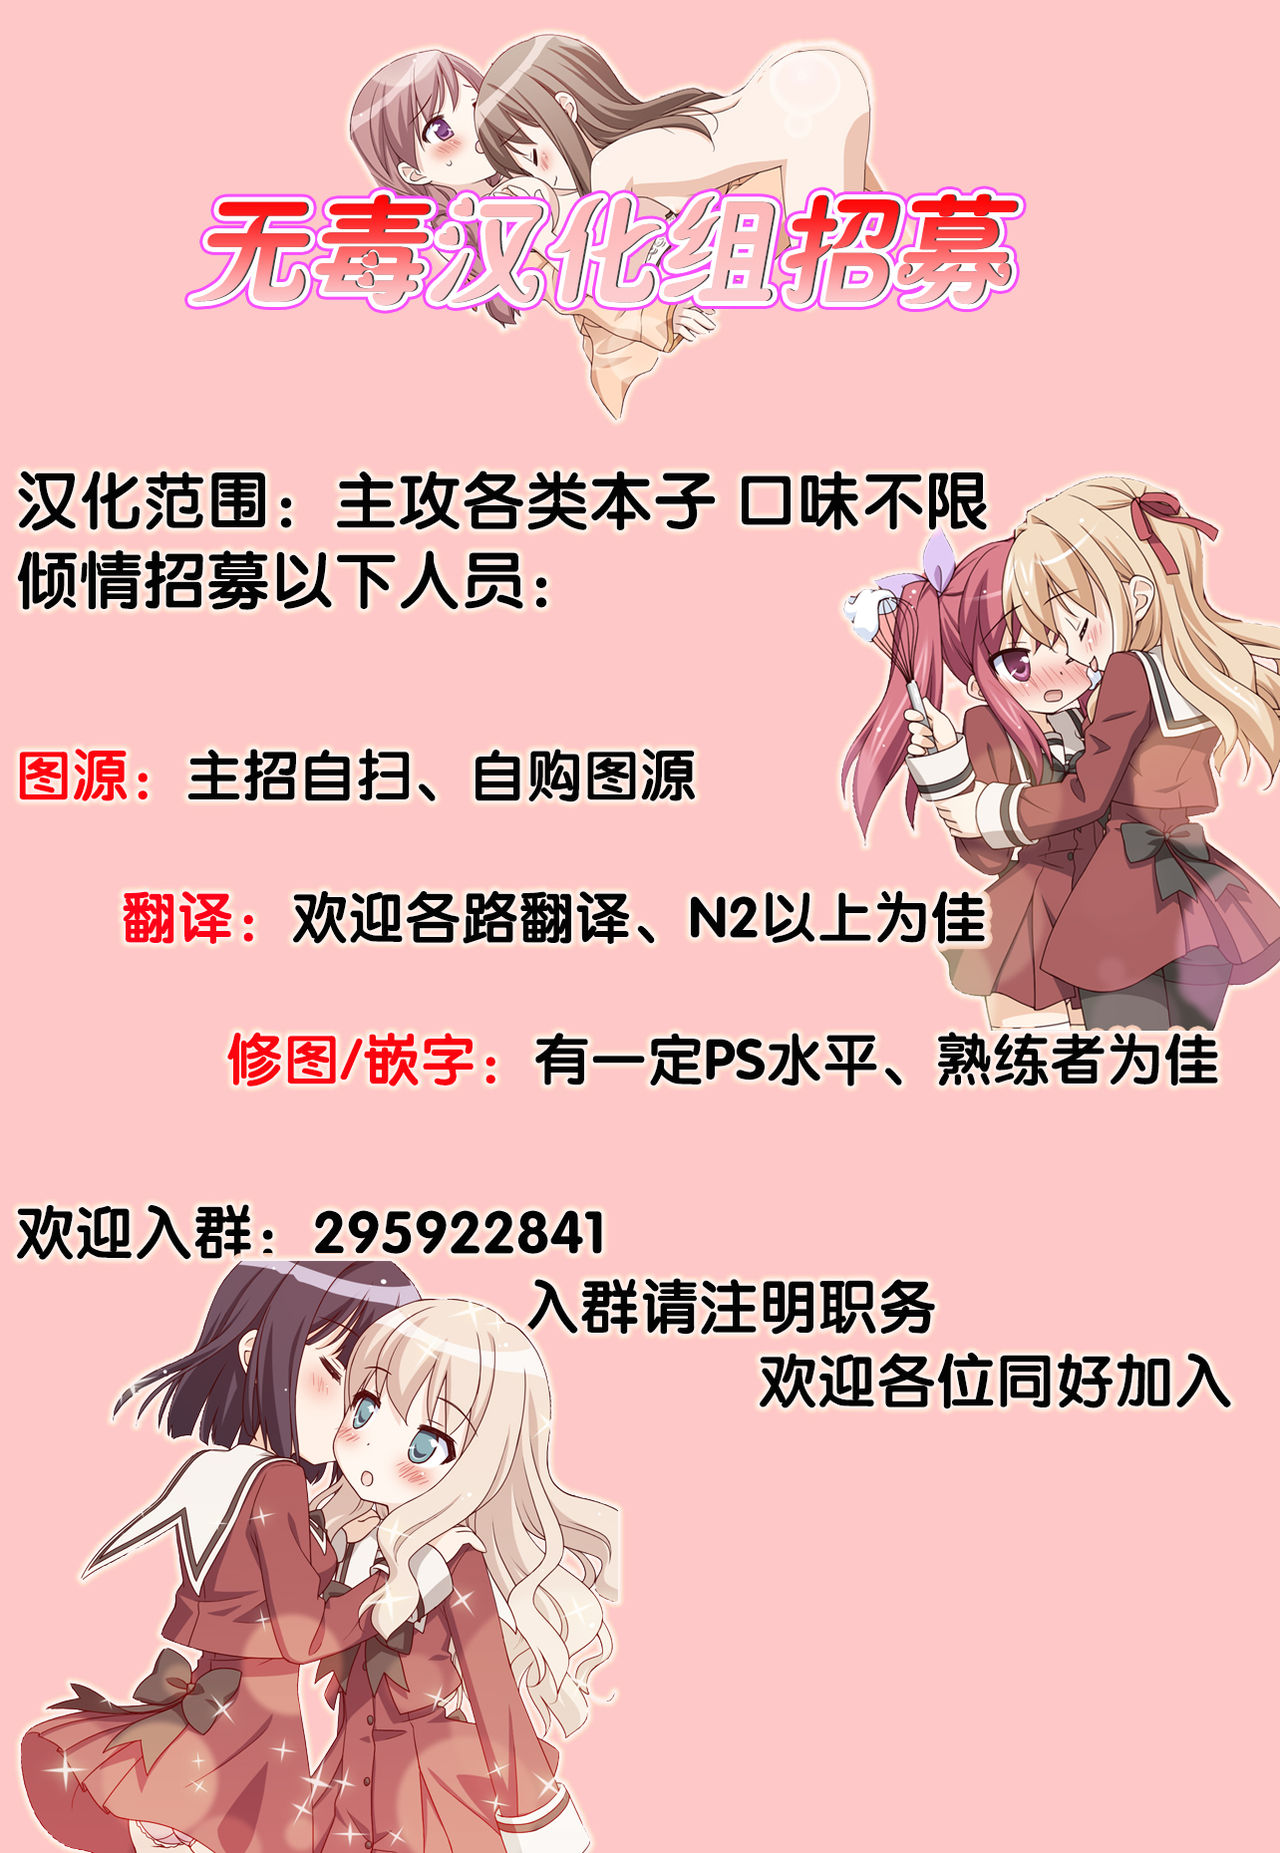 [Anthology] Ao Yuri -Story Of Club Activities- [Chinese] [无毒汉化组] [Incomplete] [アンソロジー] 青百合 -Story Of Club Activities- [中文翻譯] [ページ欠落]